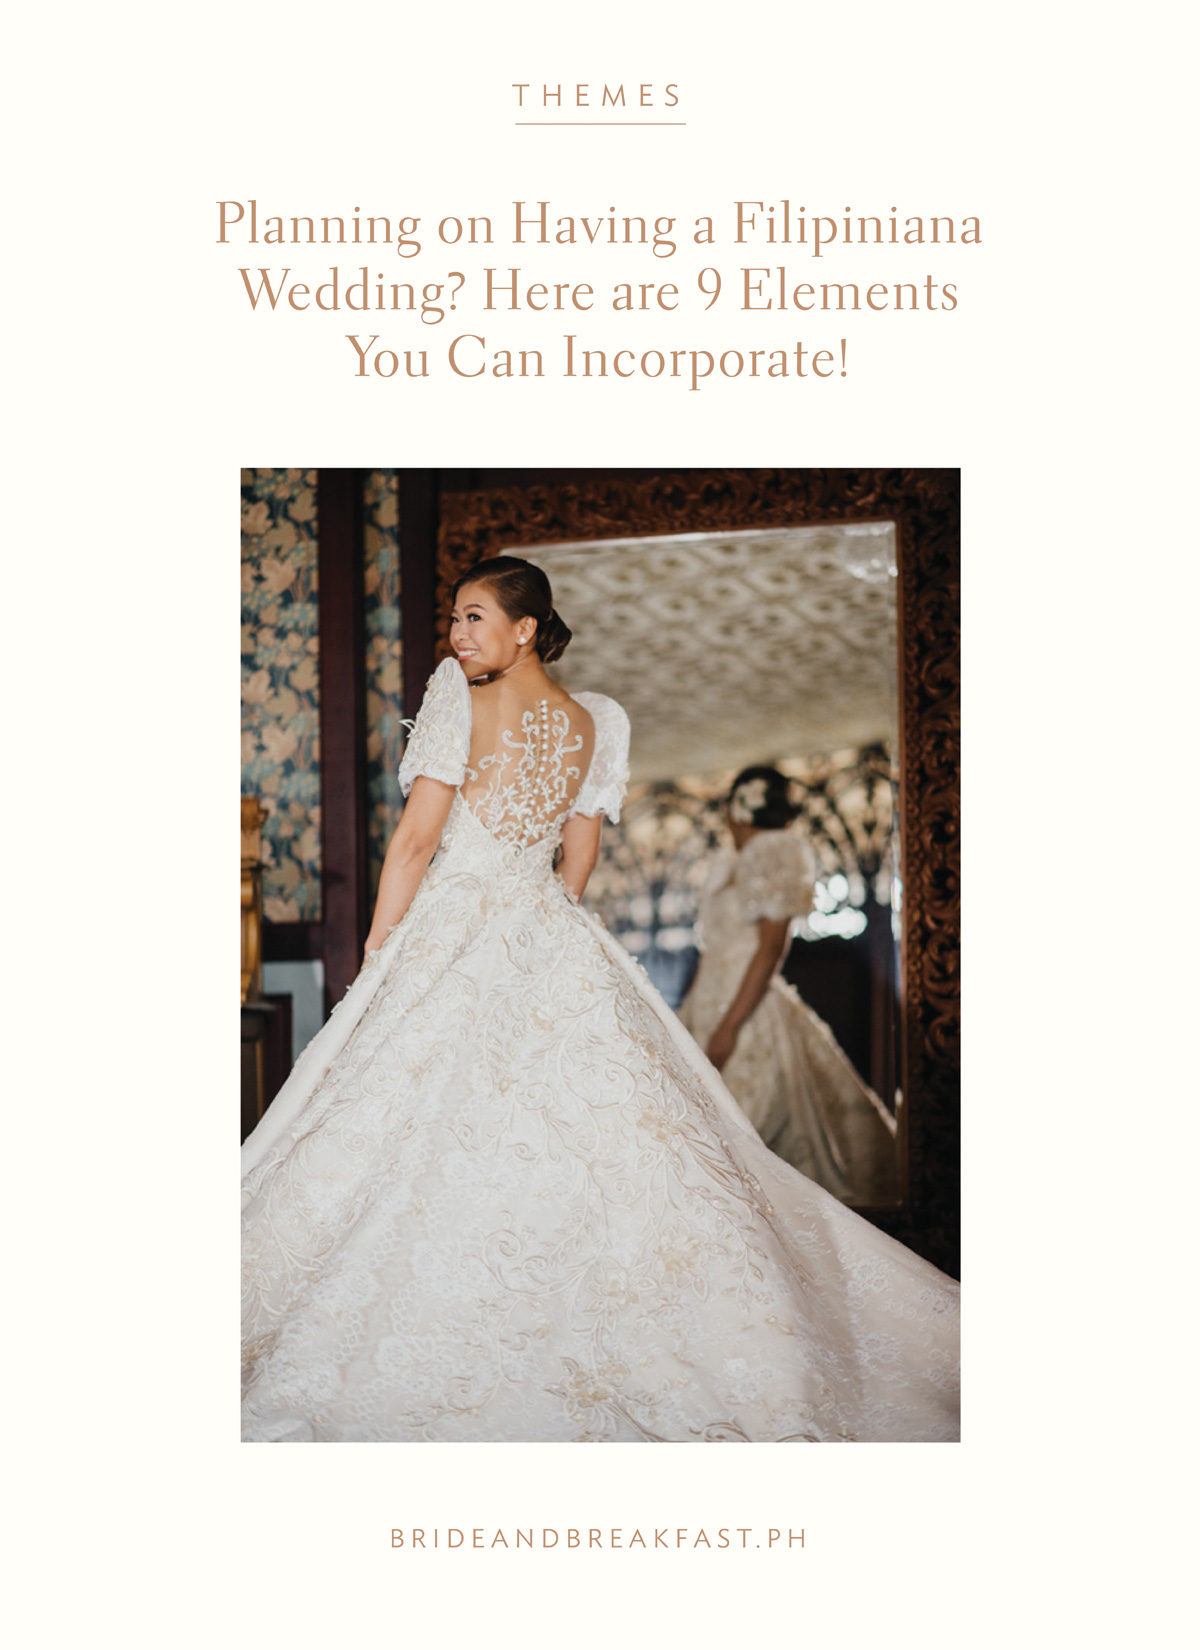 Planning on Having a Filipiniana Wedding? Here are 9 Elements You Can Incorporate!